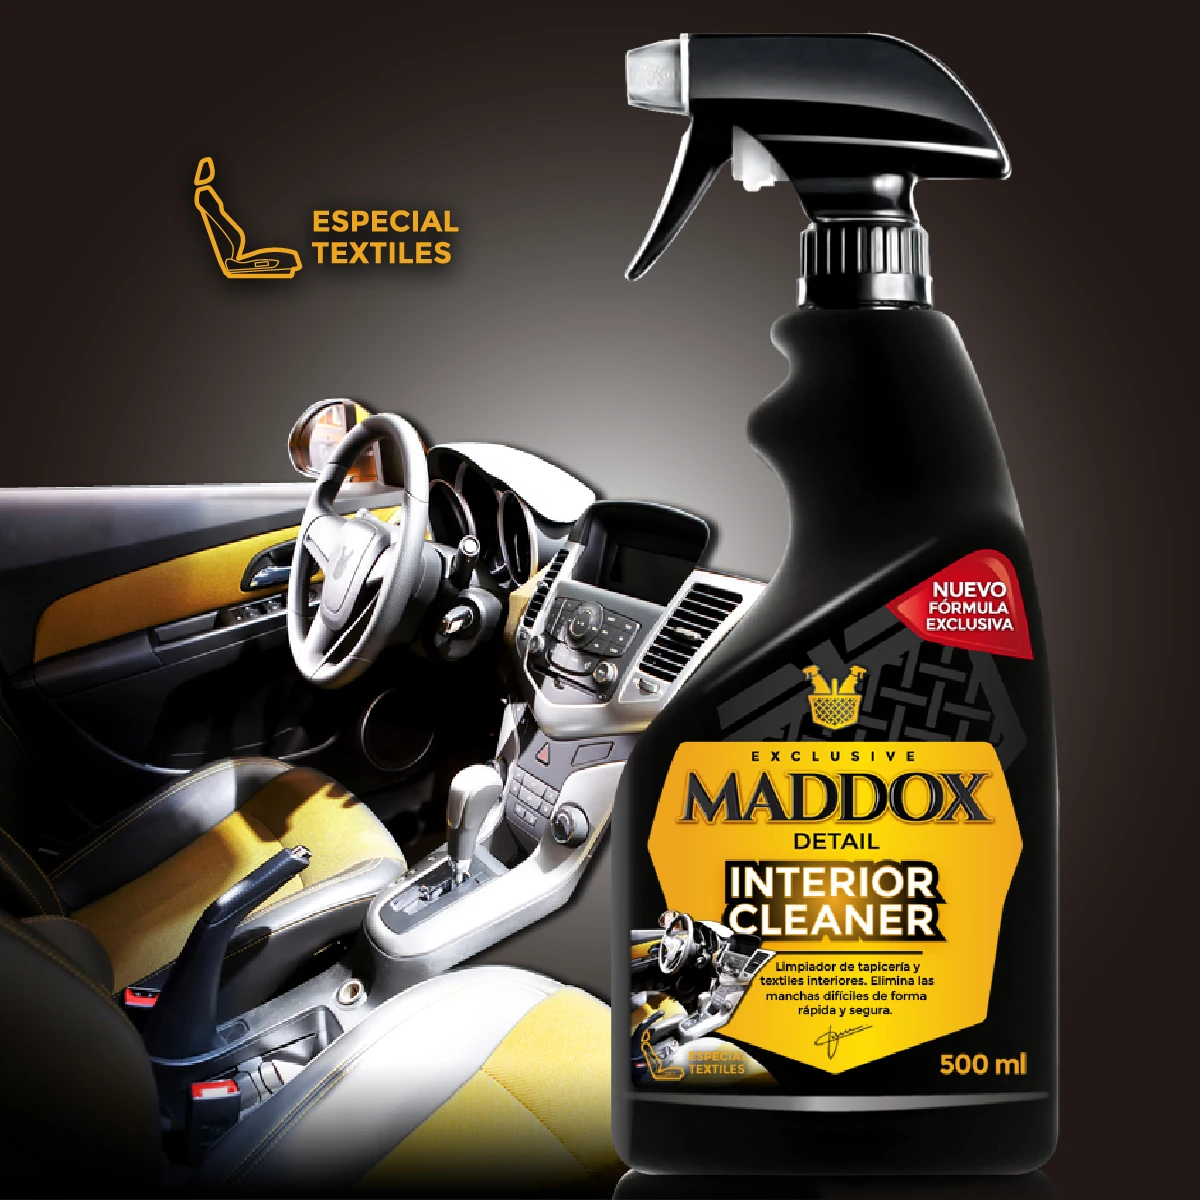 500 ml Maddox Detail Interior Cleaner textile upholstery Cleaner